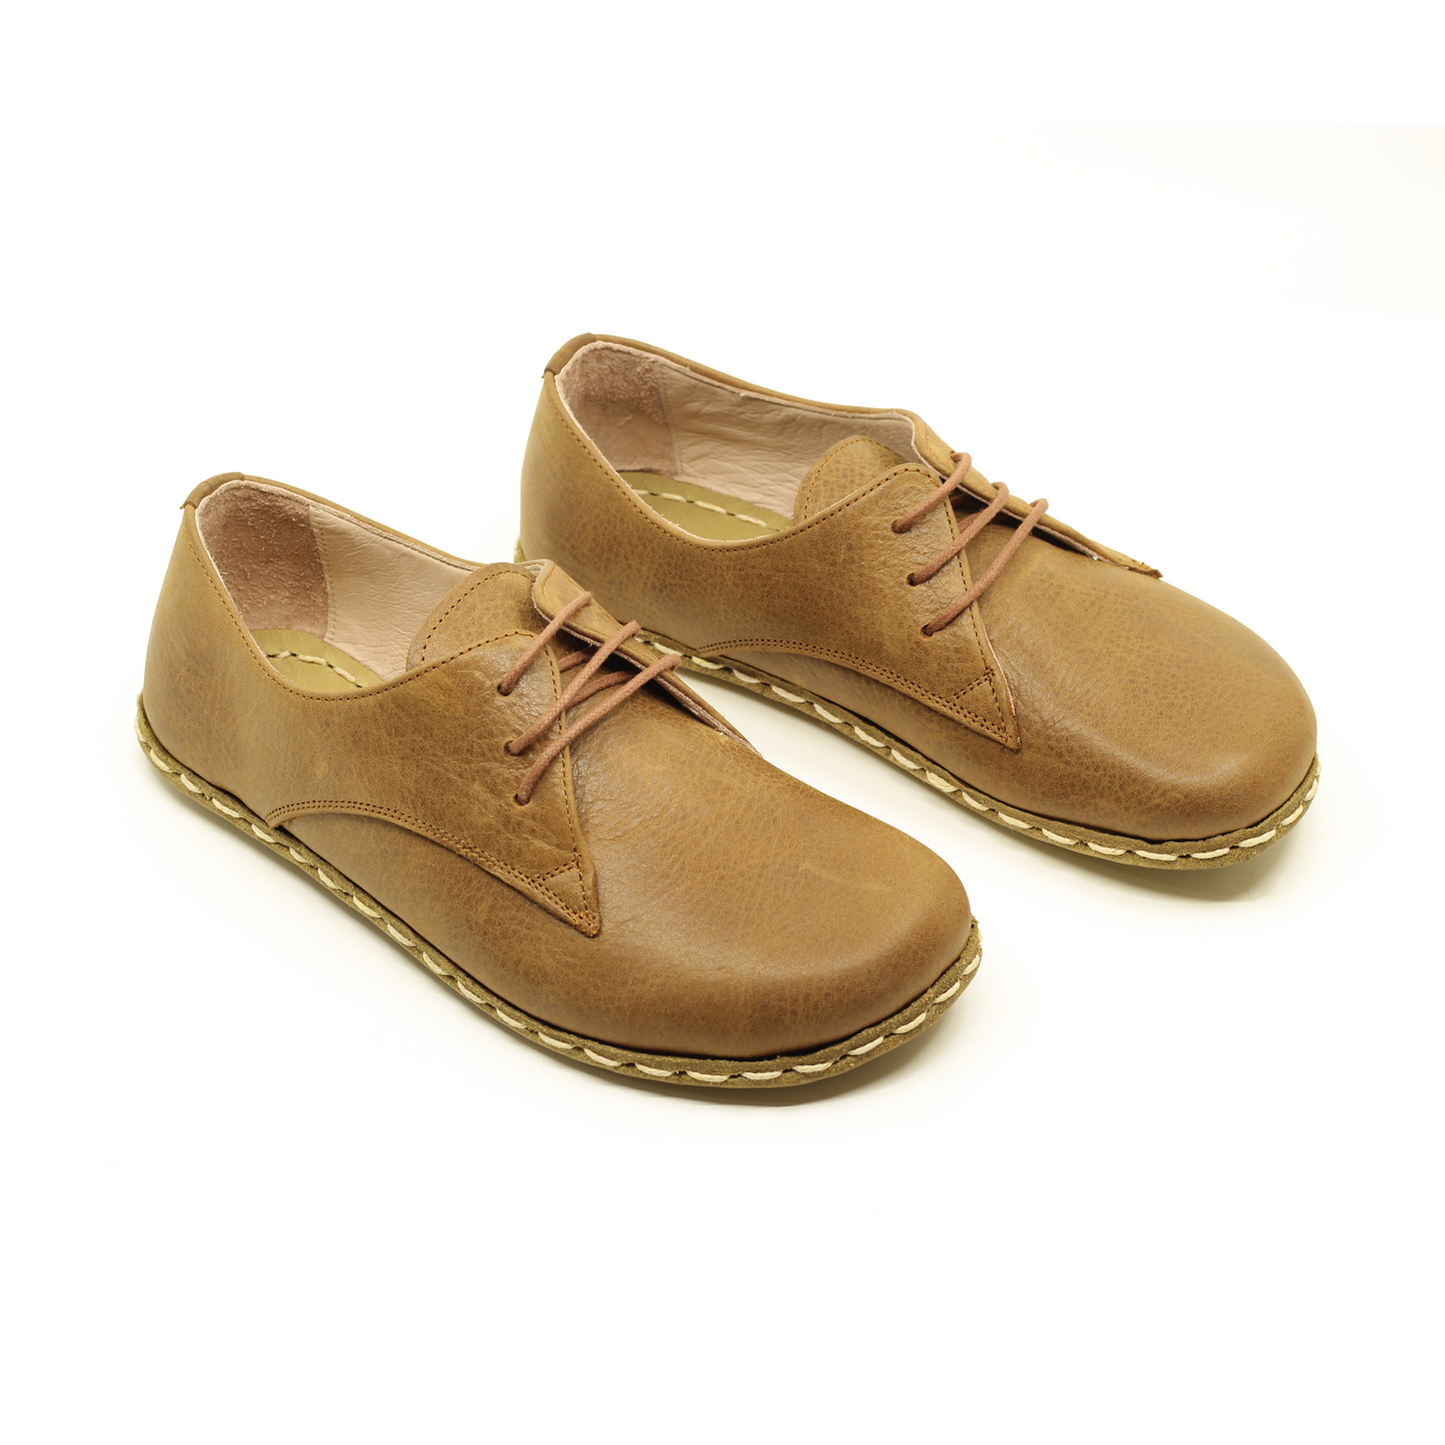 Matte Brown Leather Oxford Barefoot Shoes for Men - Natural Leather Sole